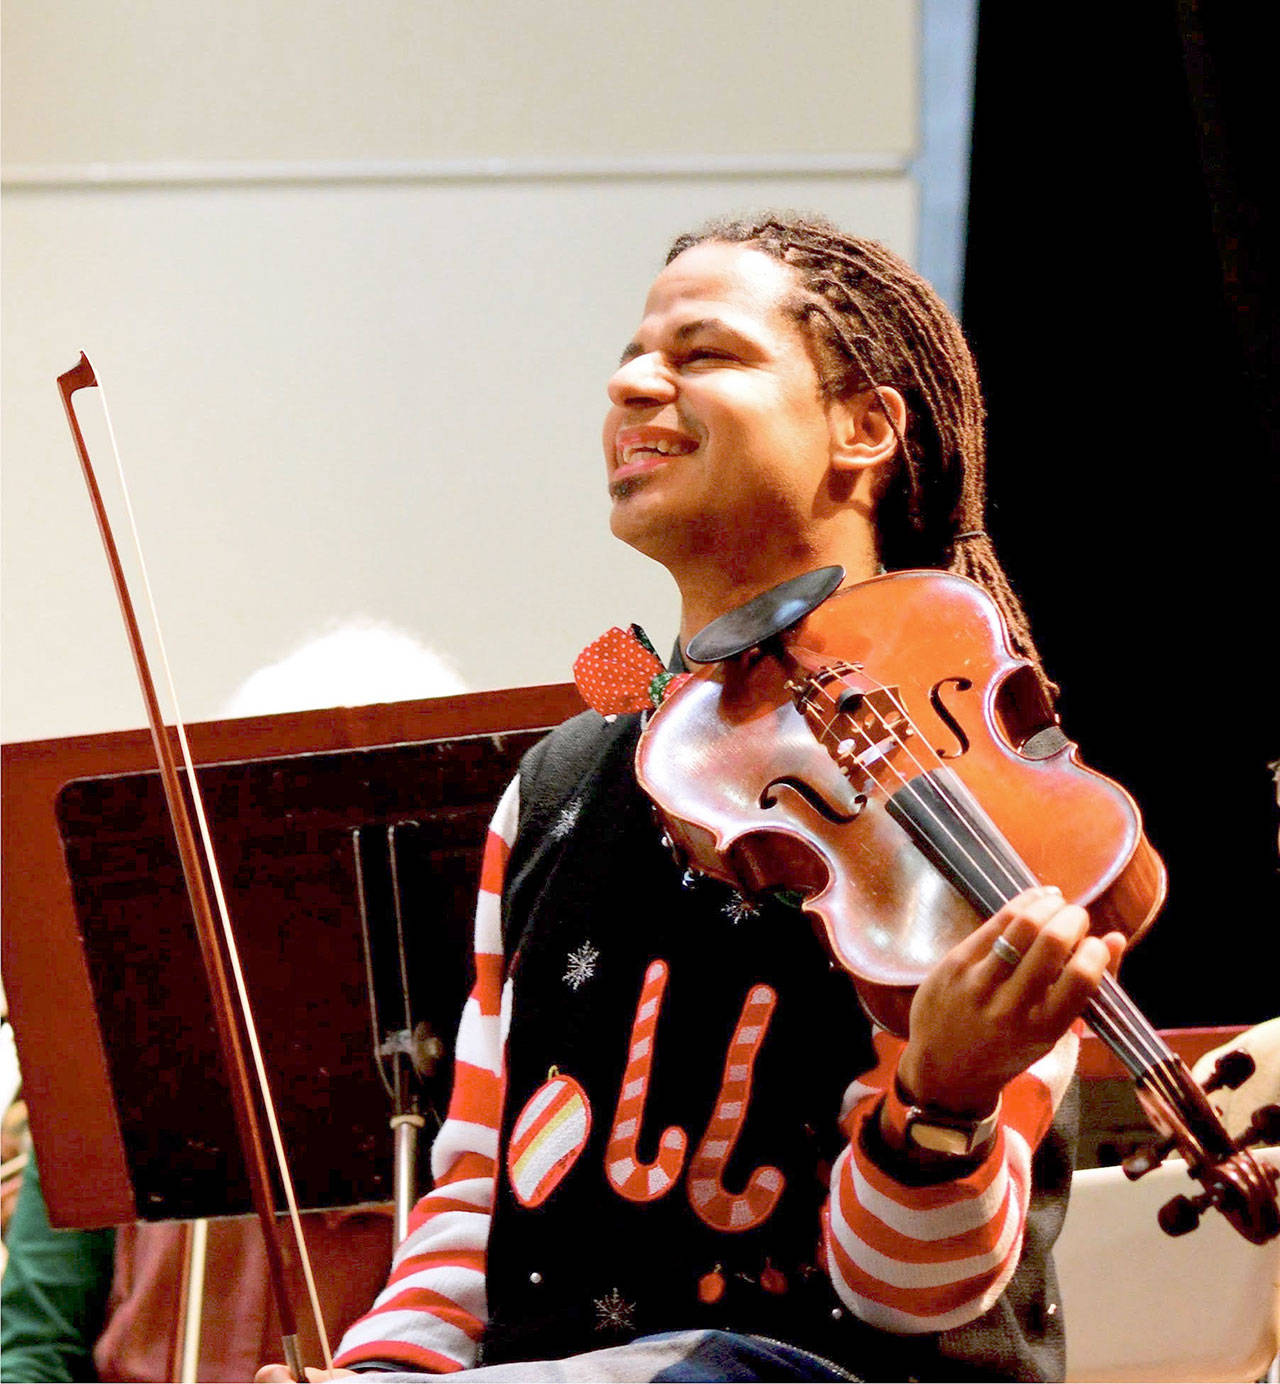 Violist Tyrone Beatty gets into the holiday mood during a Port Angeles Symphony Orchestra rehearsal. The symphony gives its Holiday Concert this Saturday. (Diane Urbani de la Paz)